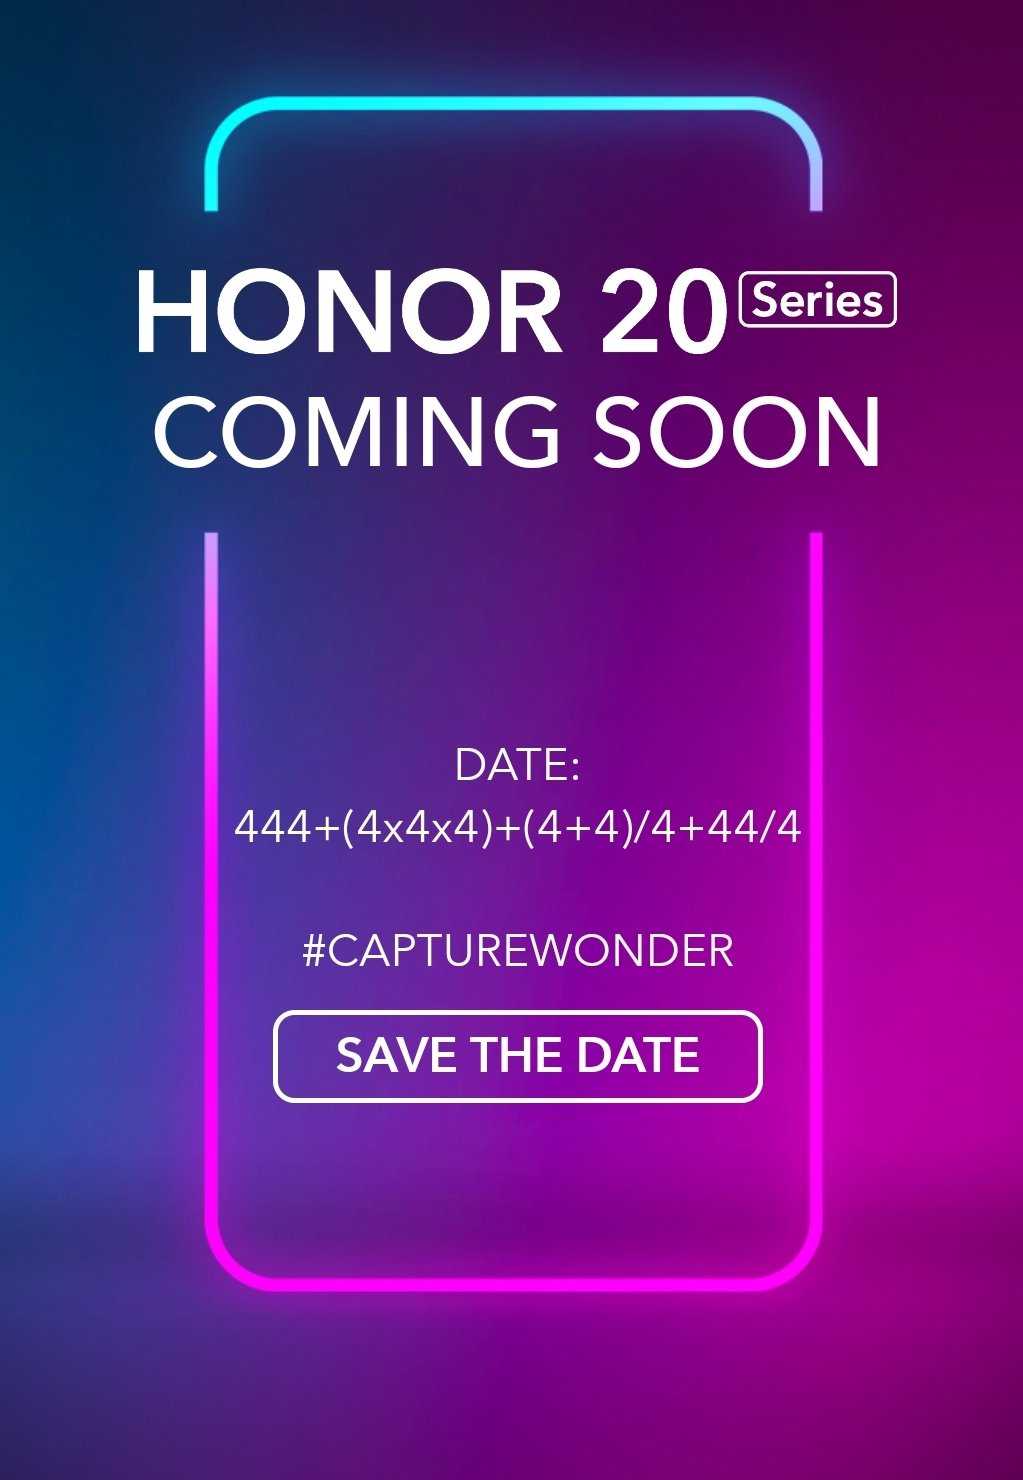 Honor 20 series launch